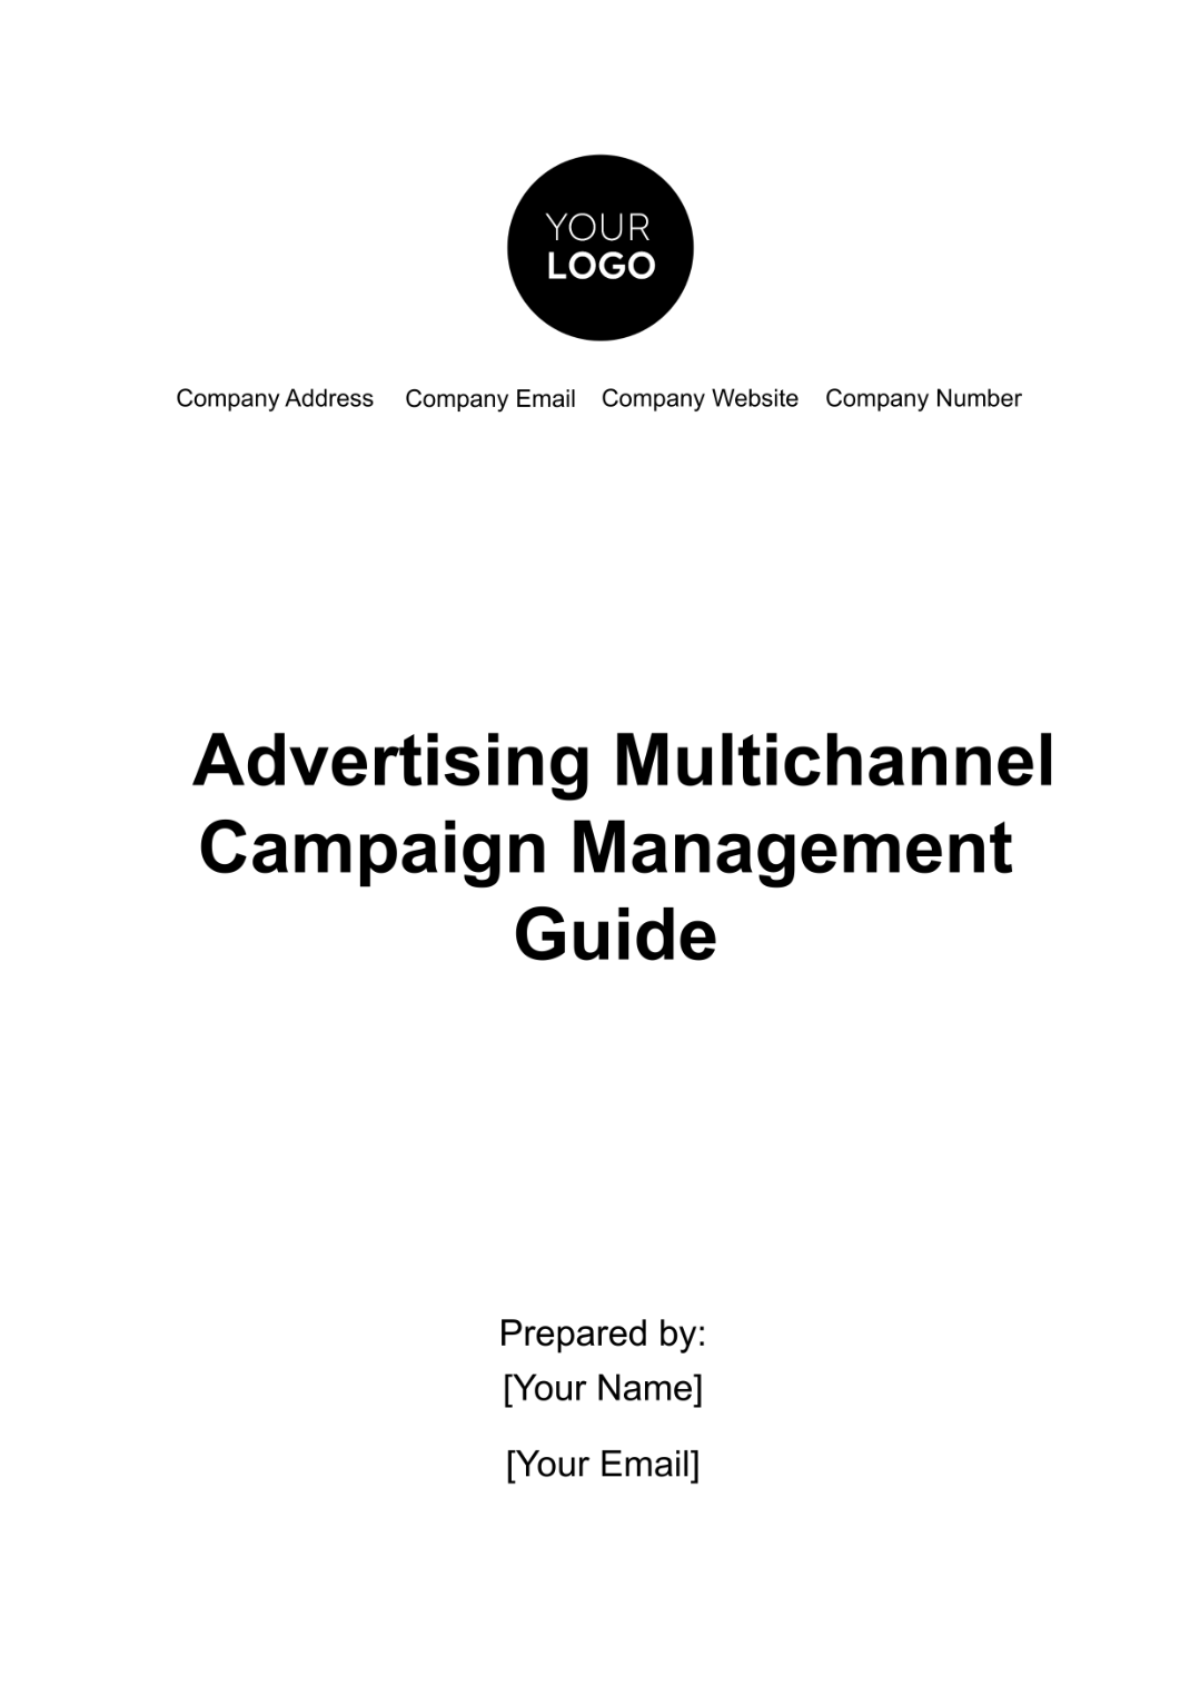 Free Advertising Multichannel Campaign Management Guide Template